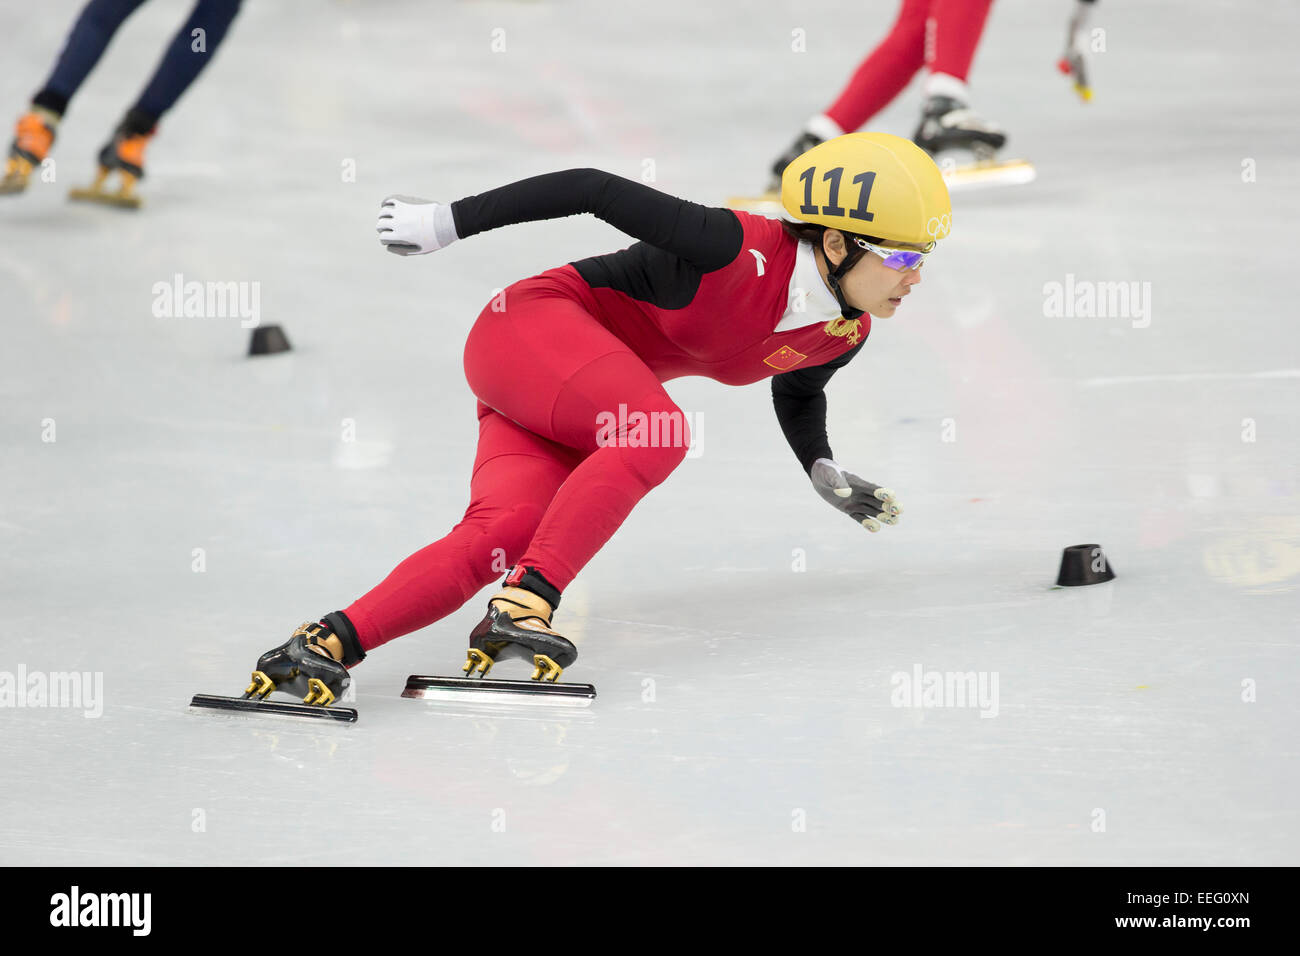 Short Track Speed Skating at the Olympic Winter Games, Sochi 2014 Stock Photo